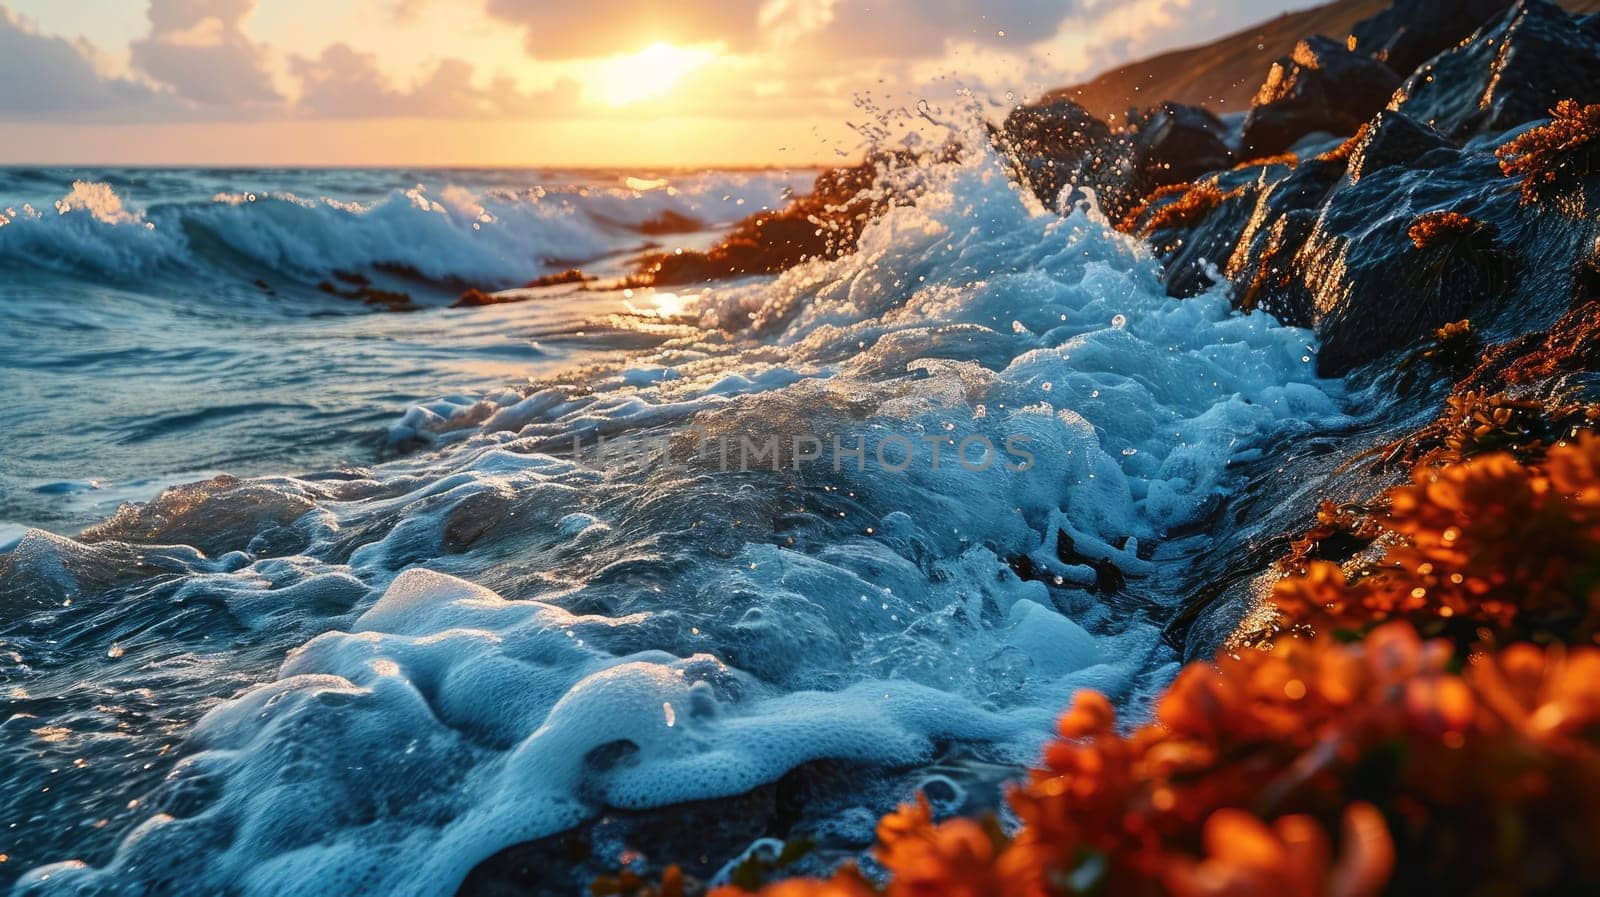 The waves of the sea at sunset awaken delight by Yurich32